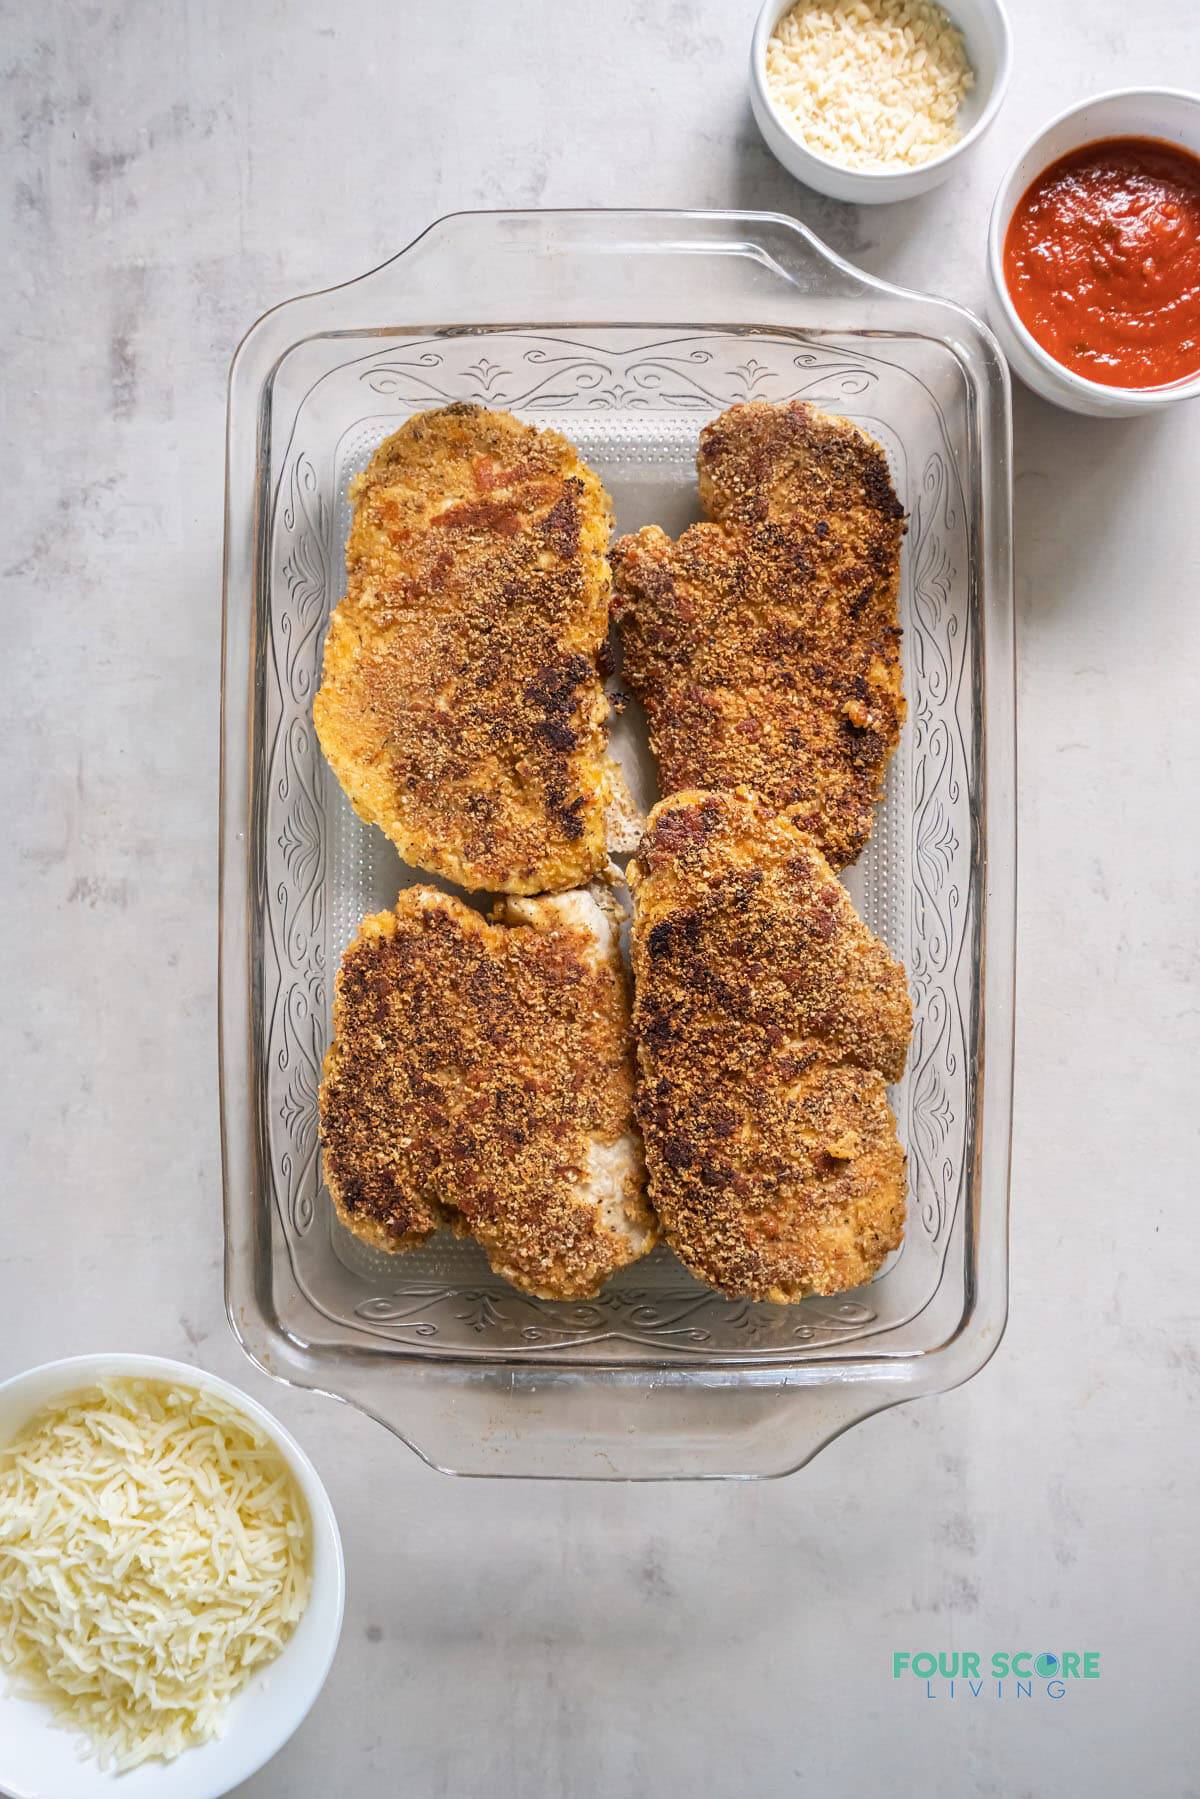 baked keto chicken parmesan cutlets in a glass baking dish. Bowls of cheese and sauce are nearby.